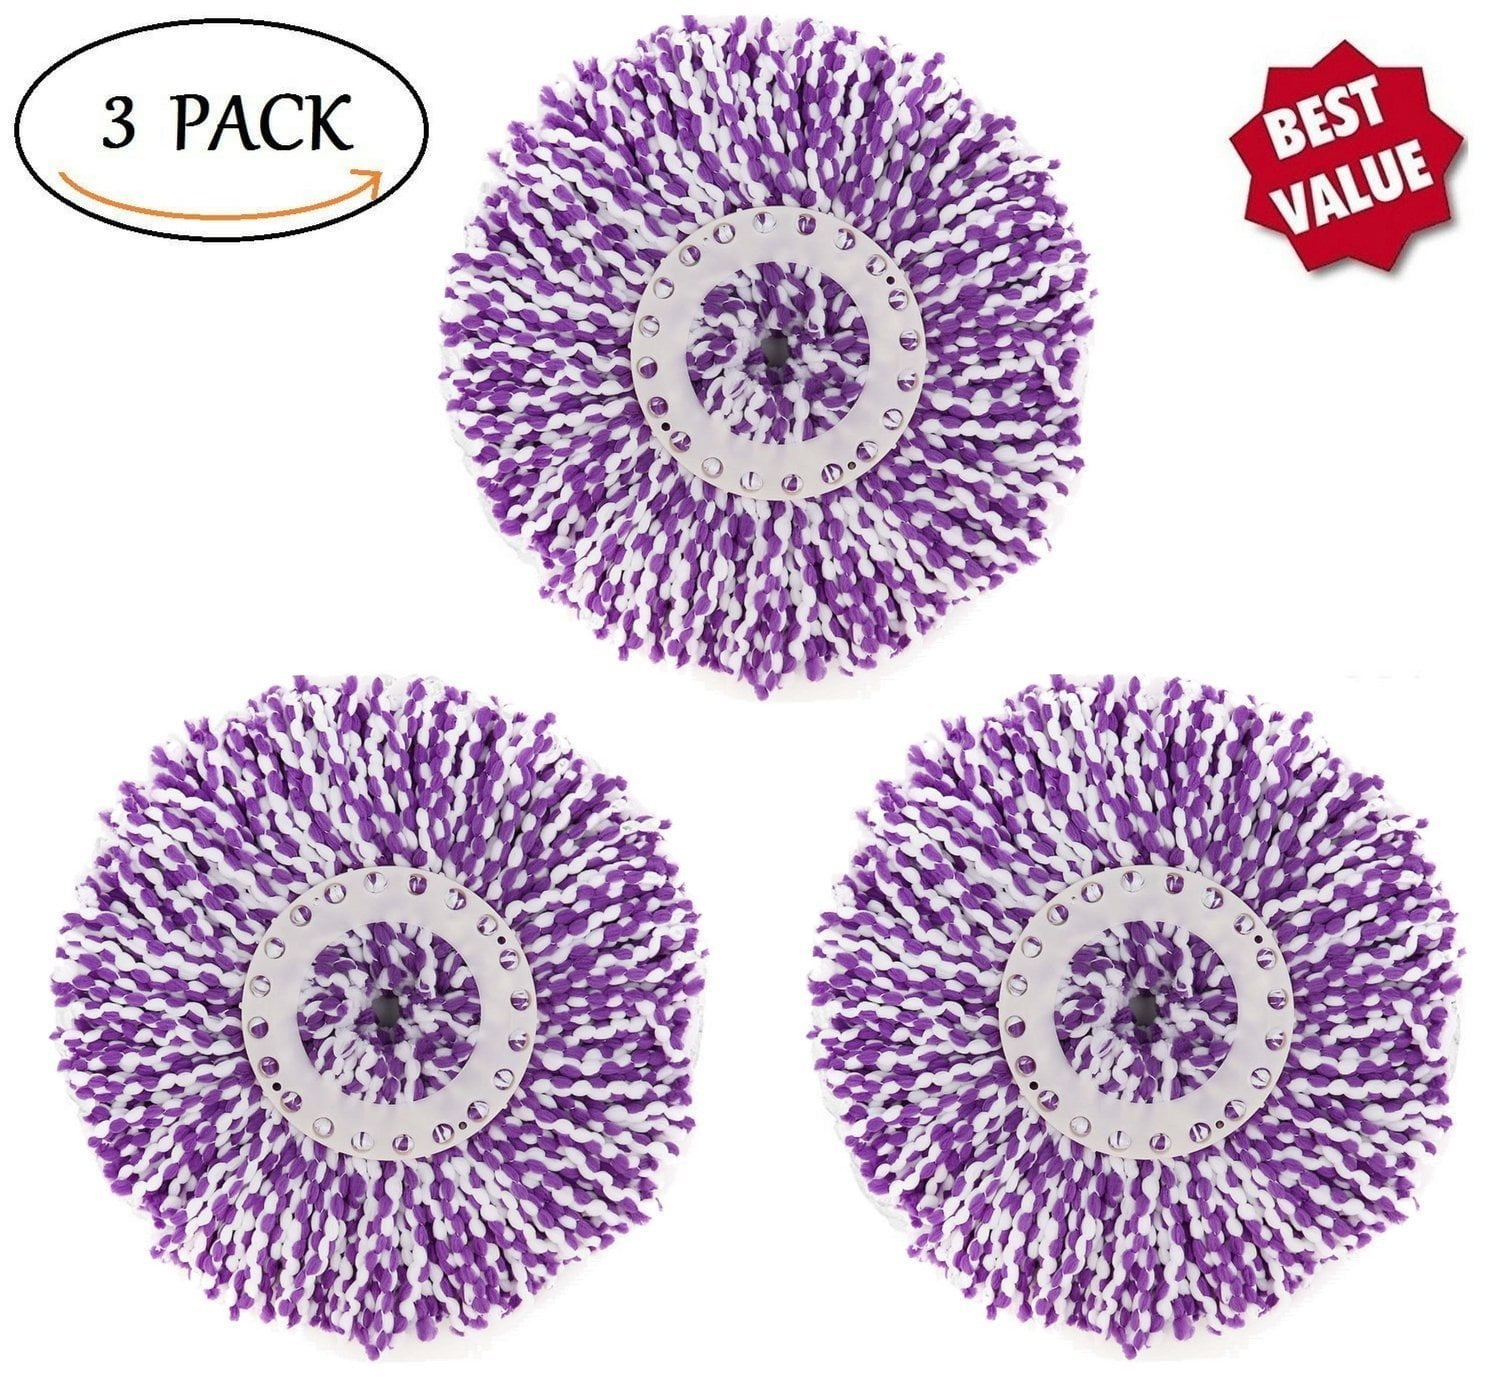 3 Pack Spin Mop Replacement Heads for 360° 6.3 Inch Diameter Microfiber Mop Head Replacement Refills Round Shape Standard Size Including 1 Dishcloth 